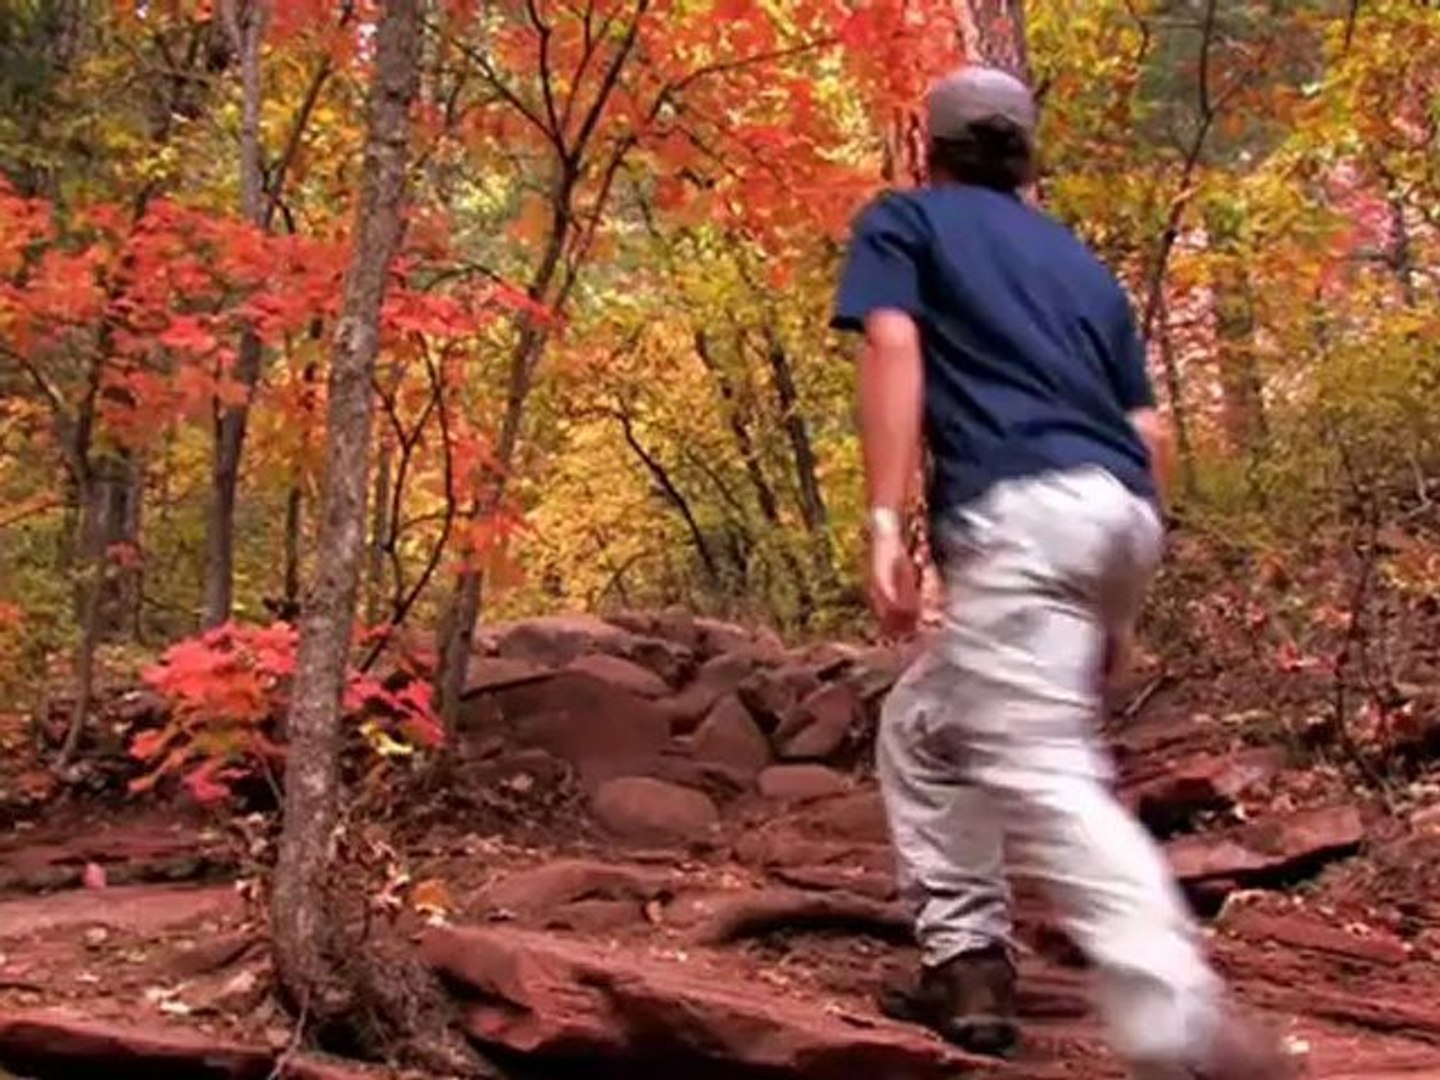 People Born in Fall More Likely to Live to 100